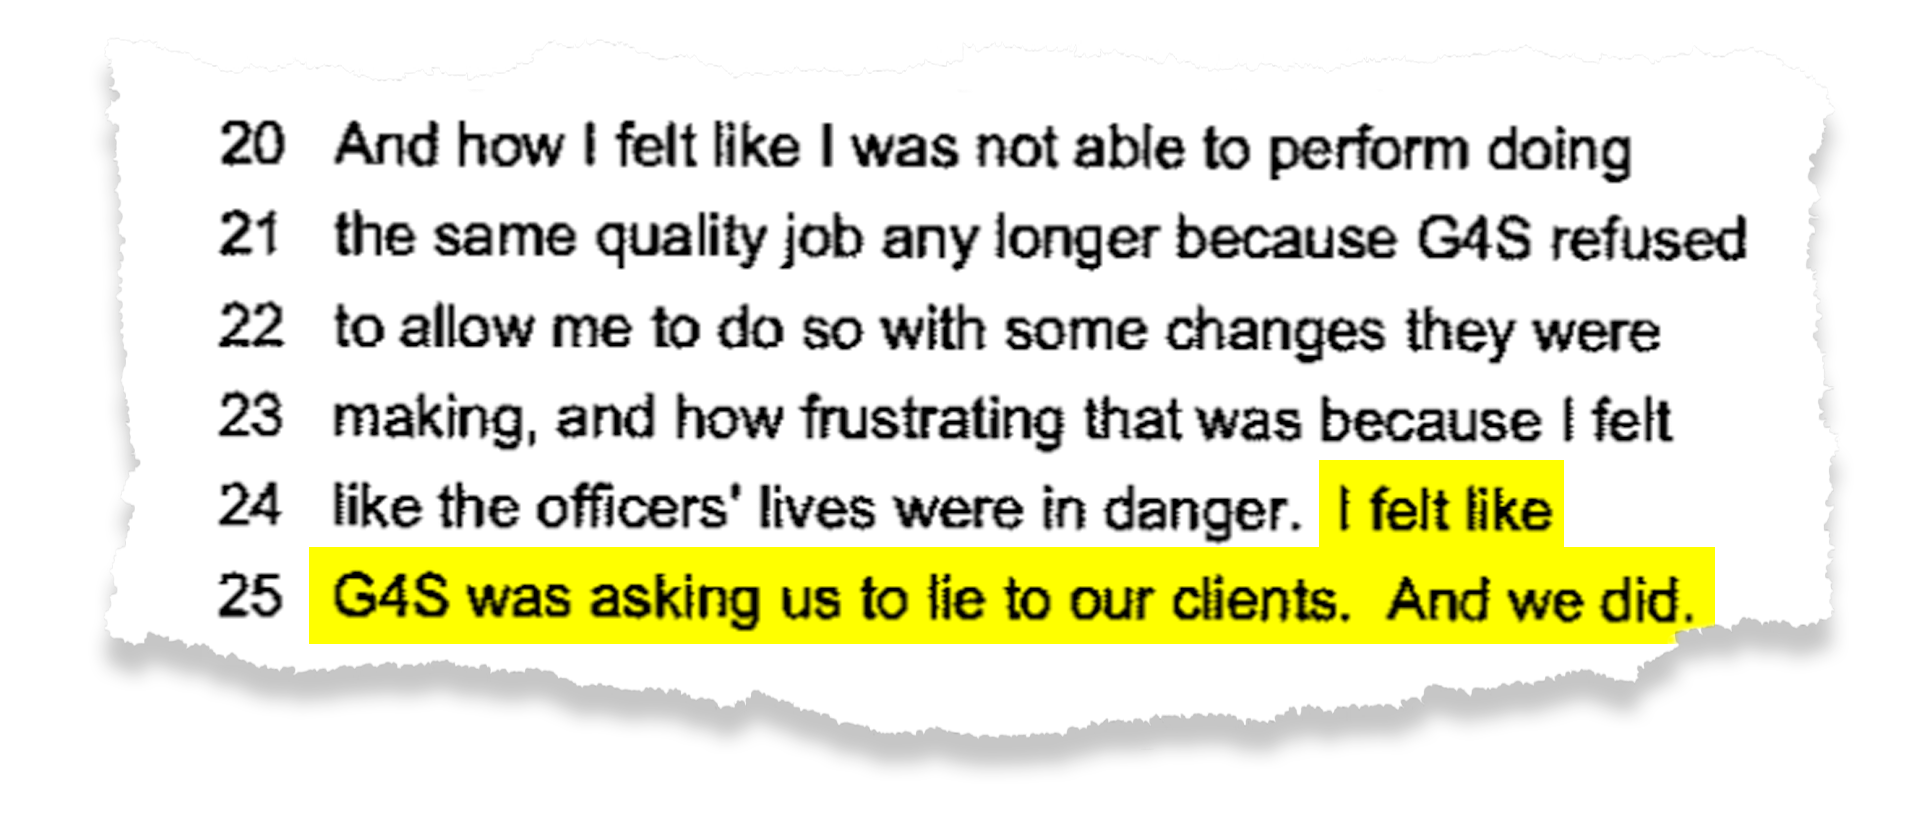 Kimberly Horton, an operations manager in Louisiana, testified in a 2016 lawsuit that G4S pushed her to quickly hire guards regardless of their qualifications.